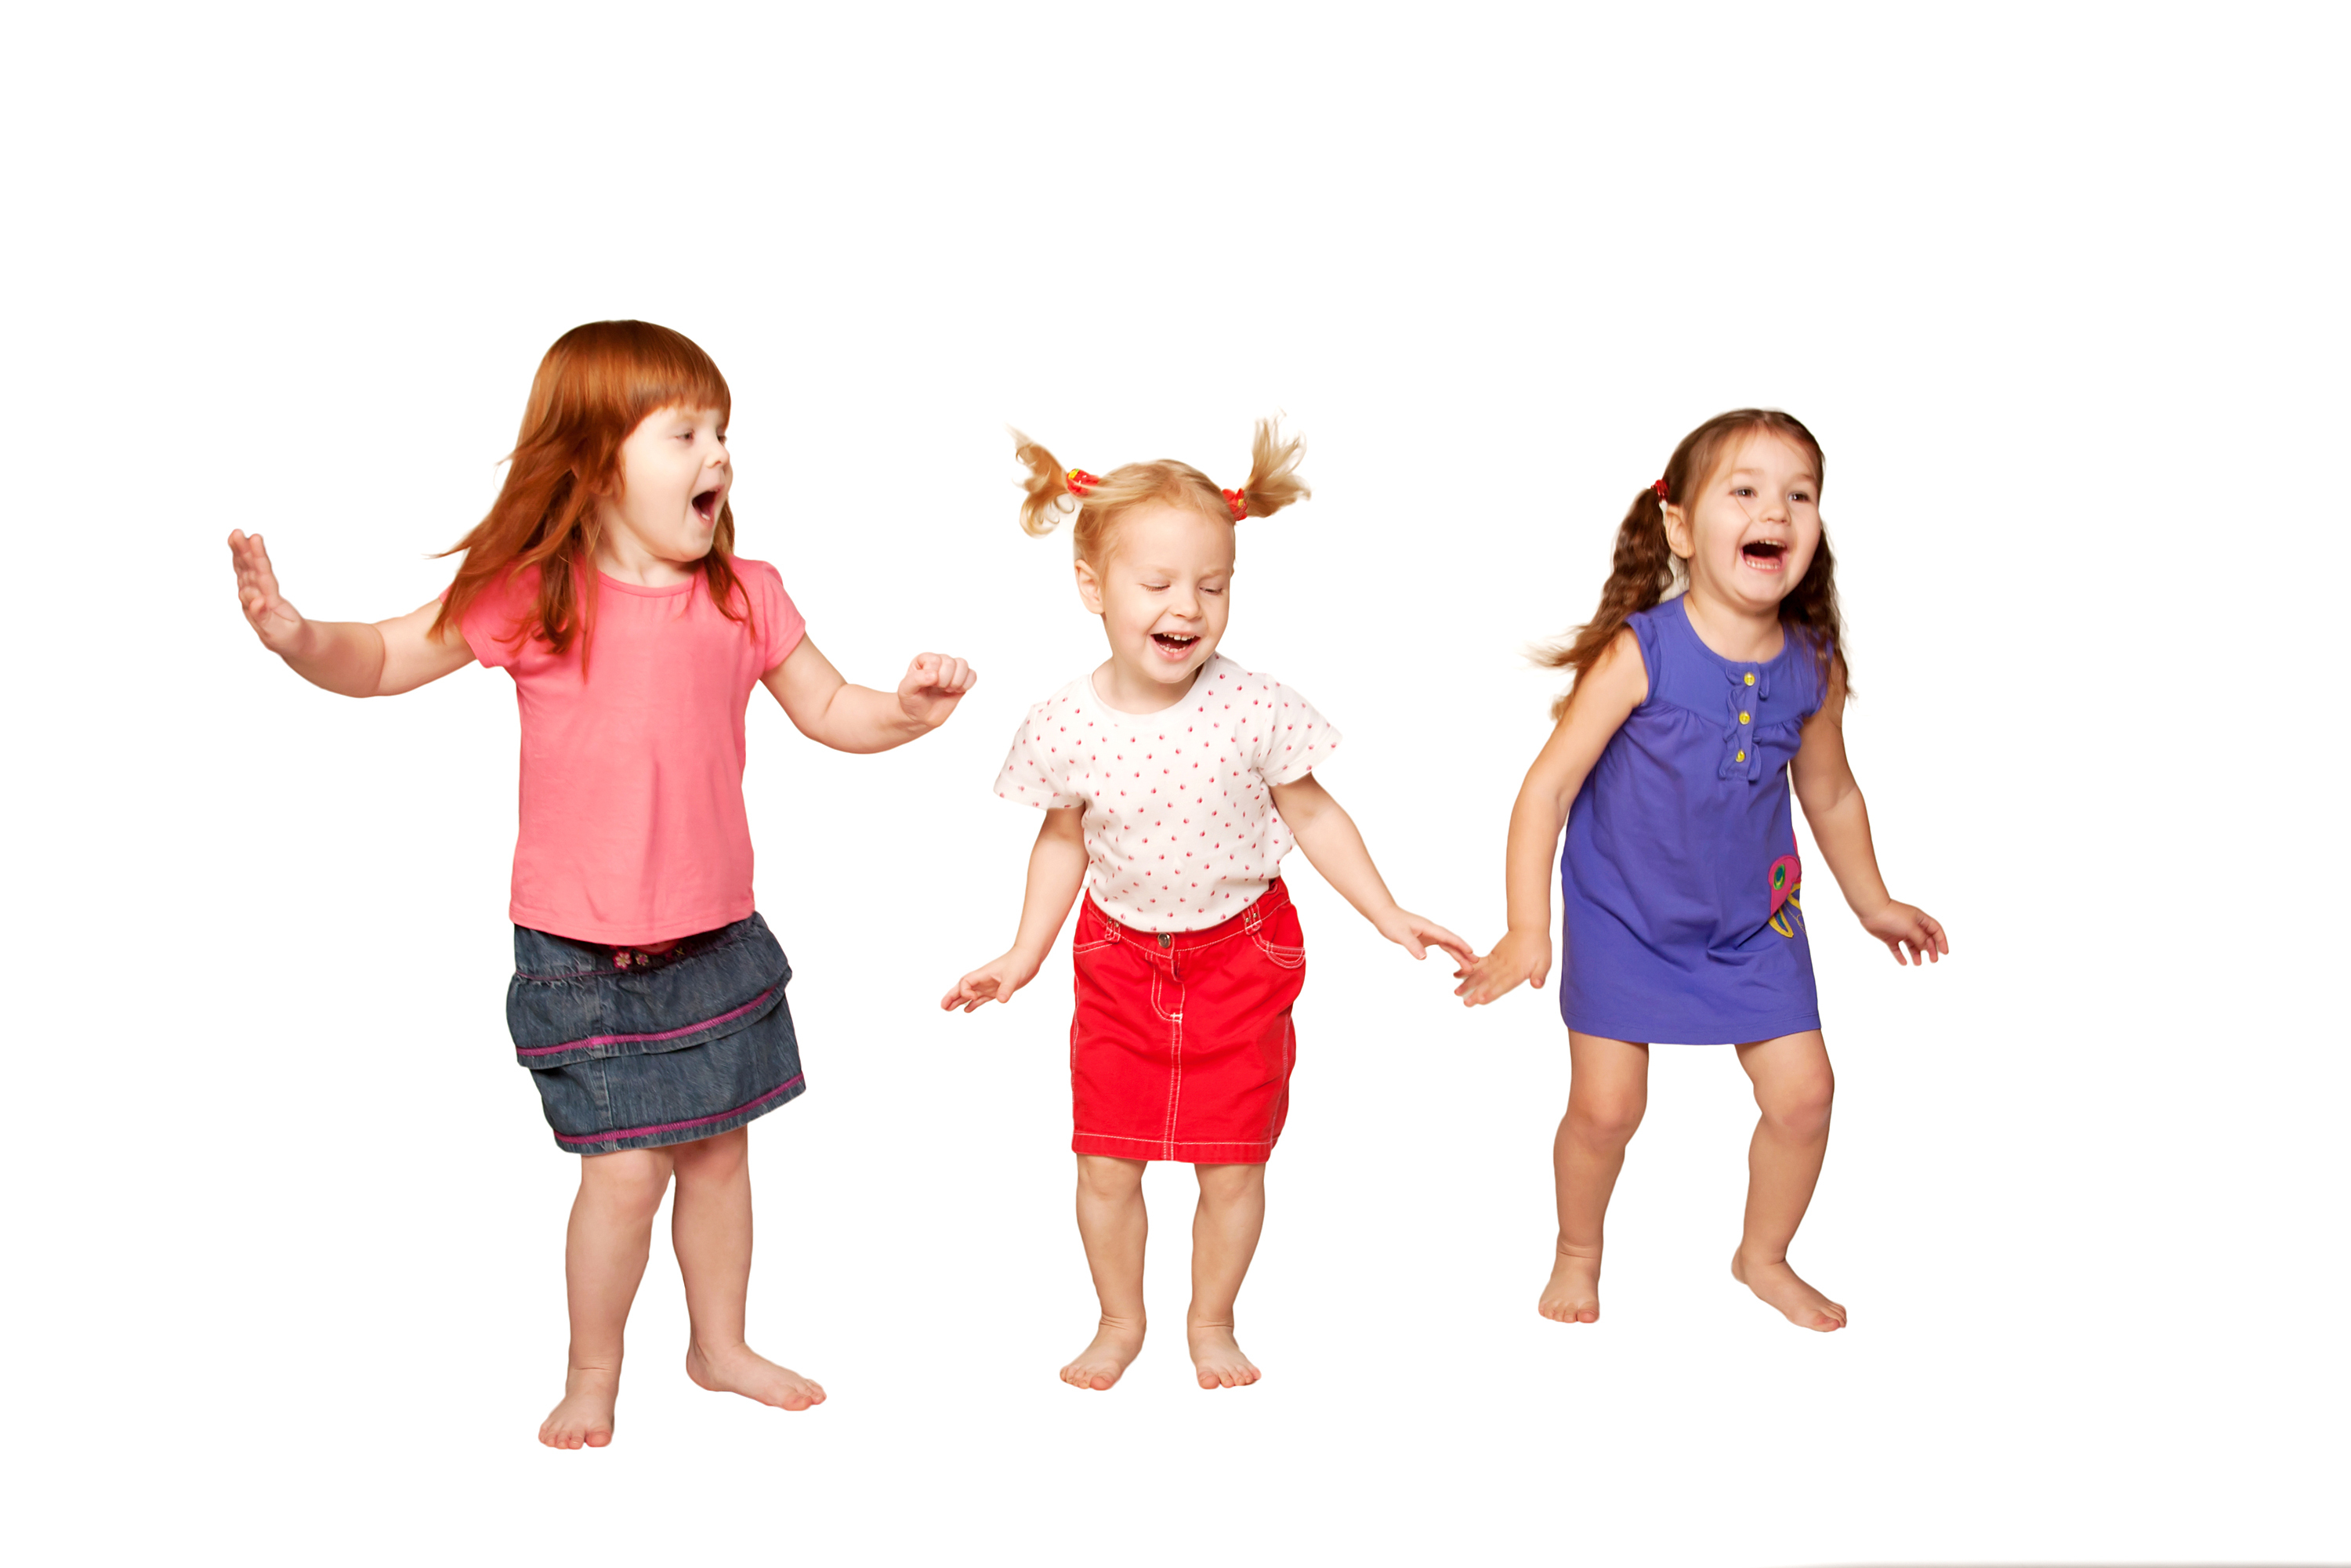 Three toddlers jumping on a white background.